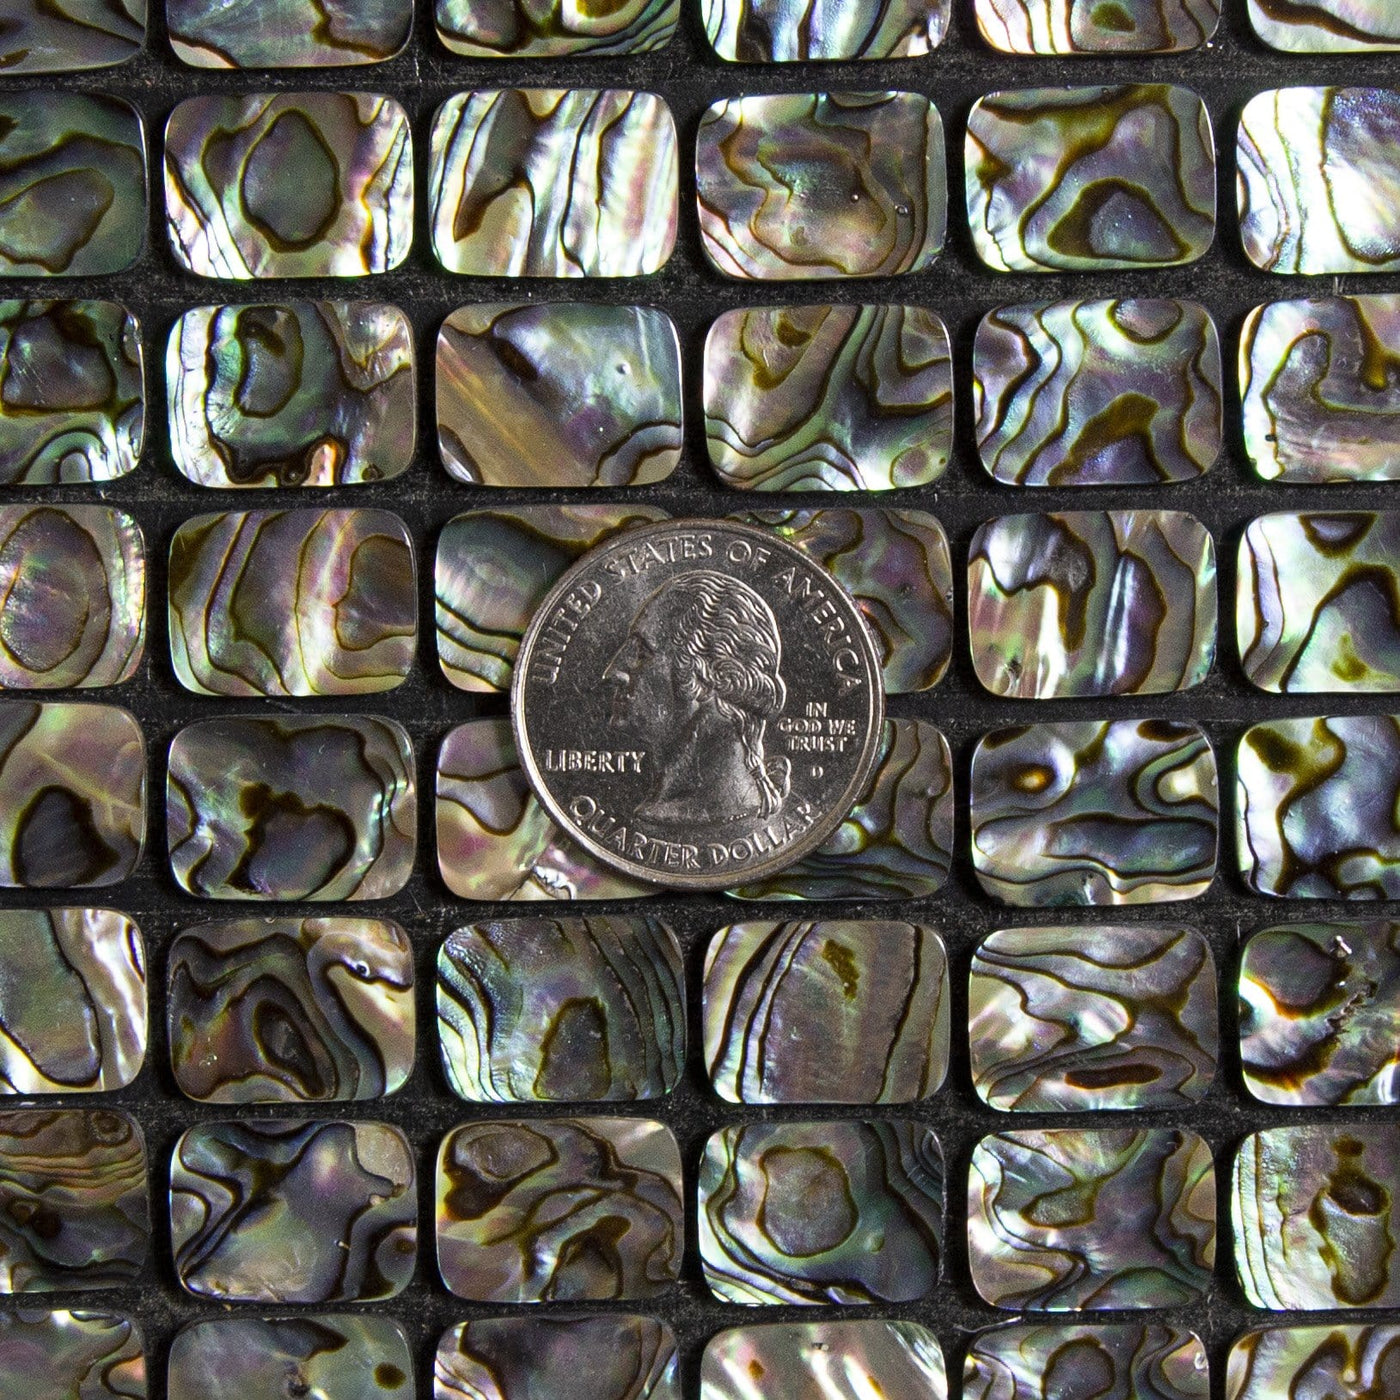 Multiple Abalone Rectangles displayed with a quarter.